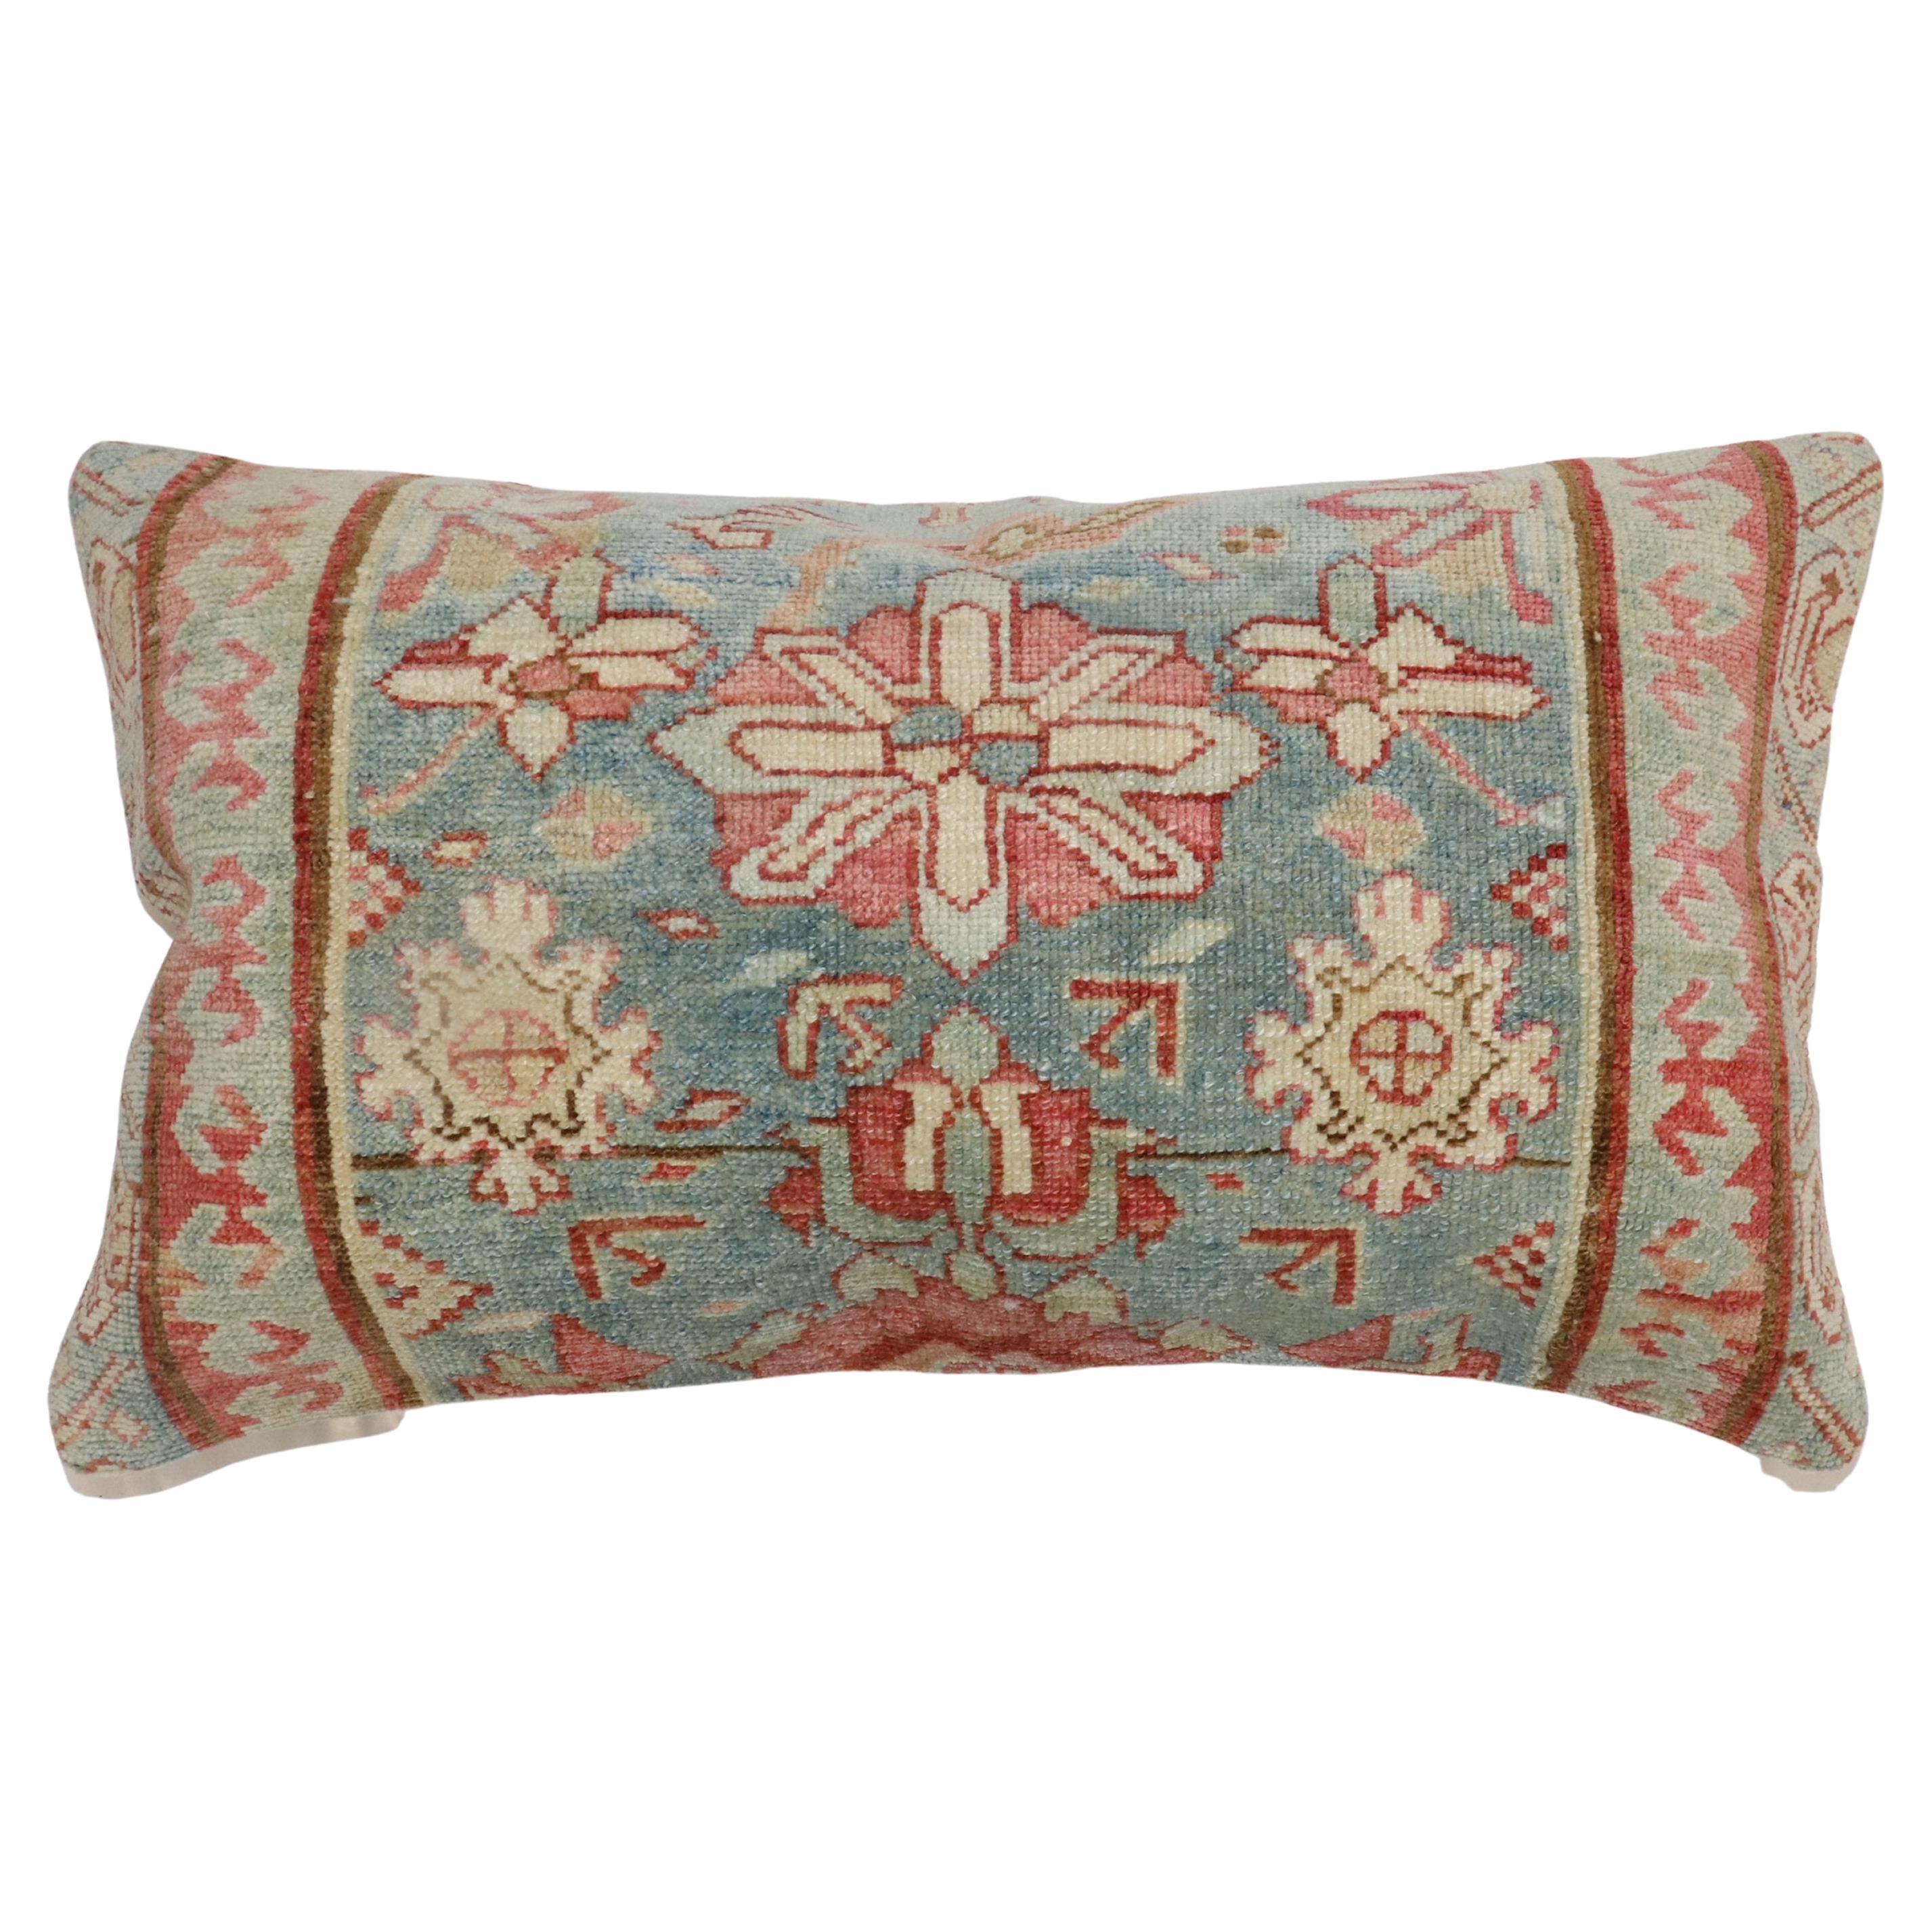 Antique Persian Malayer Floor Pillow For Sale